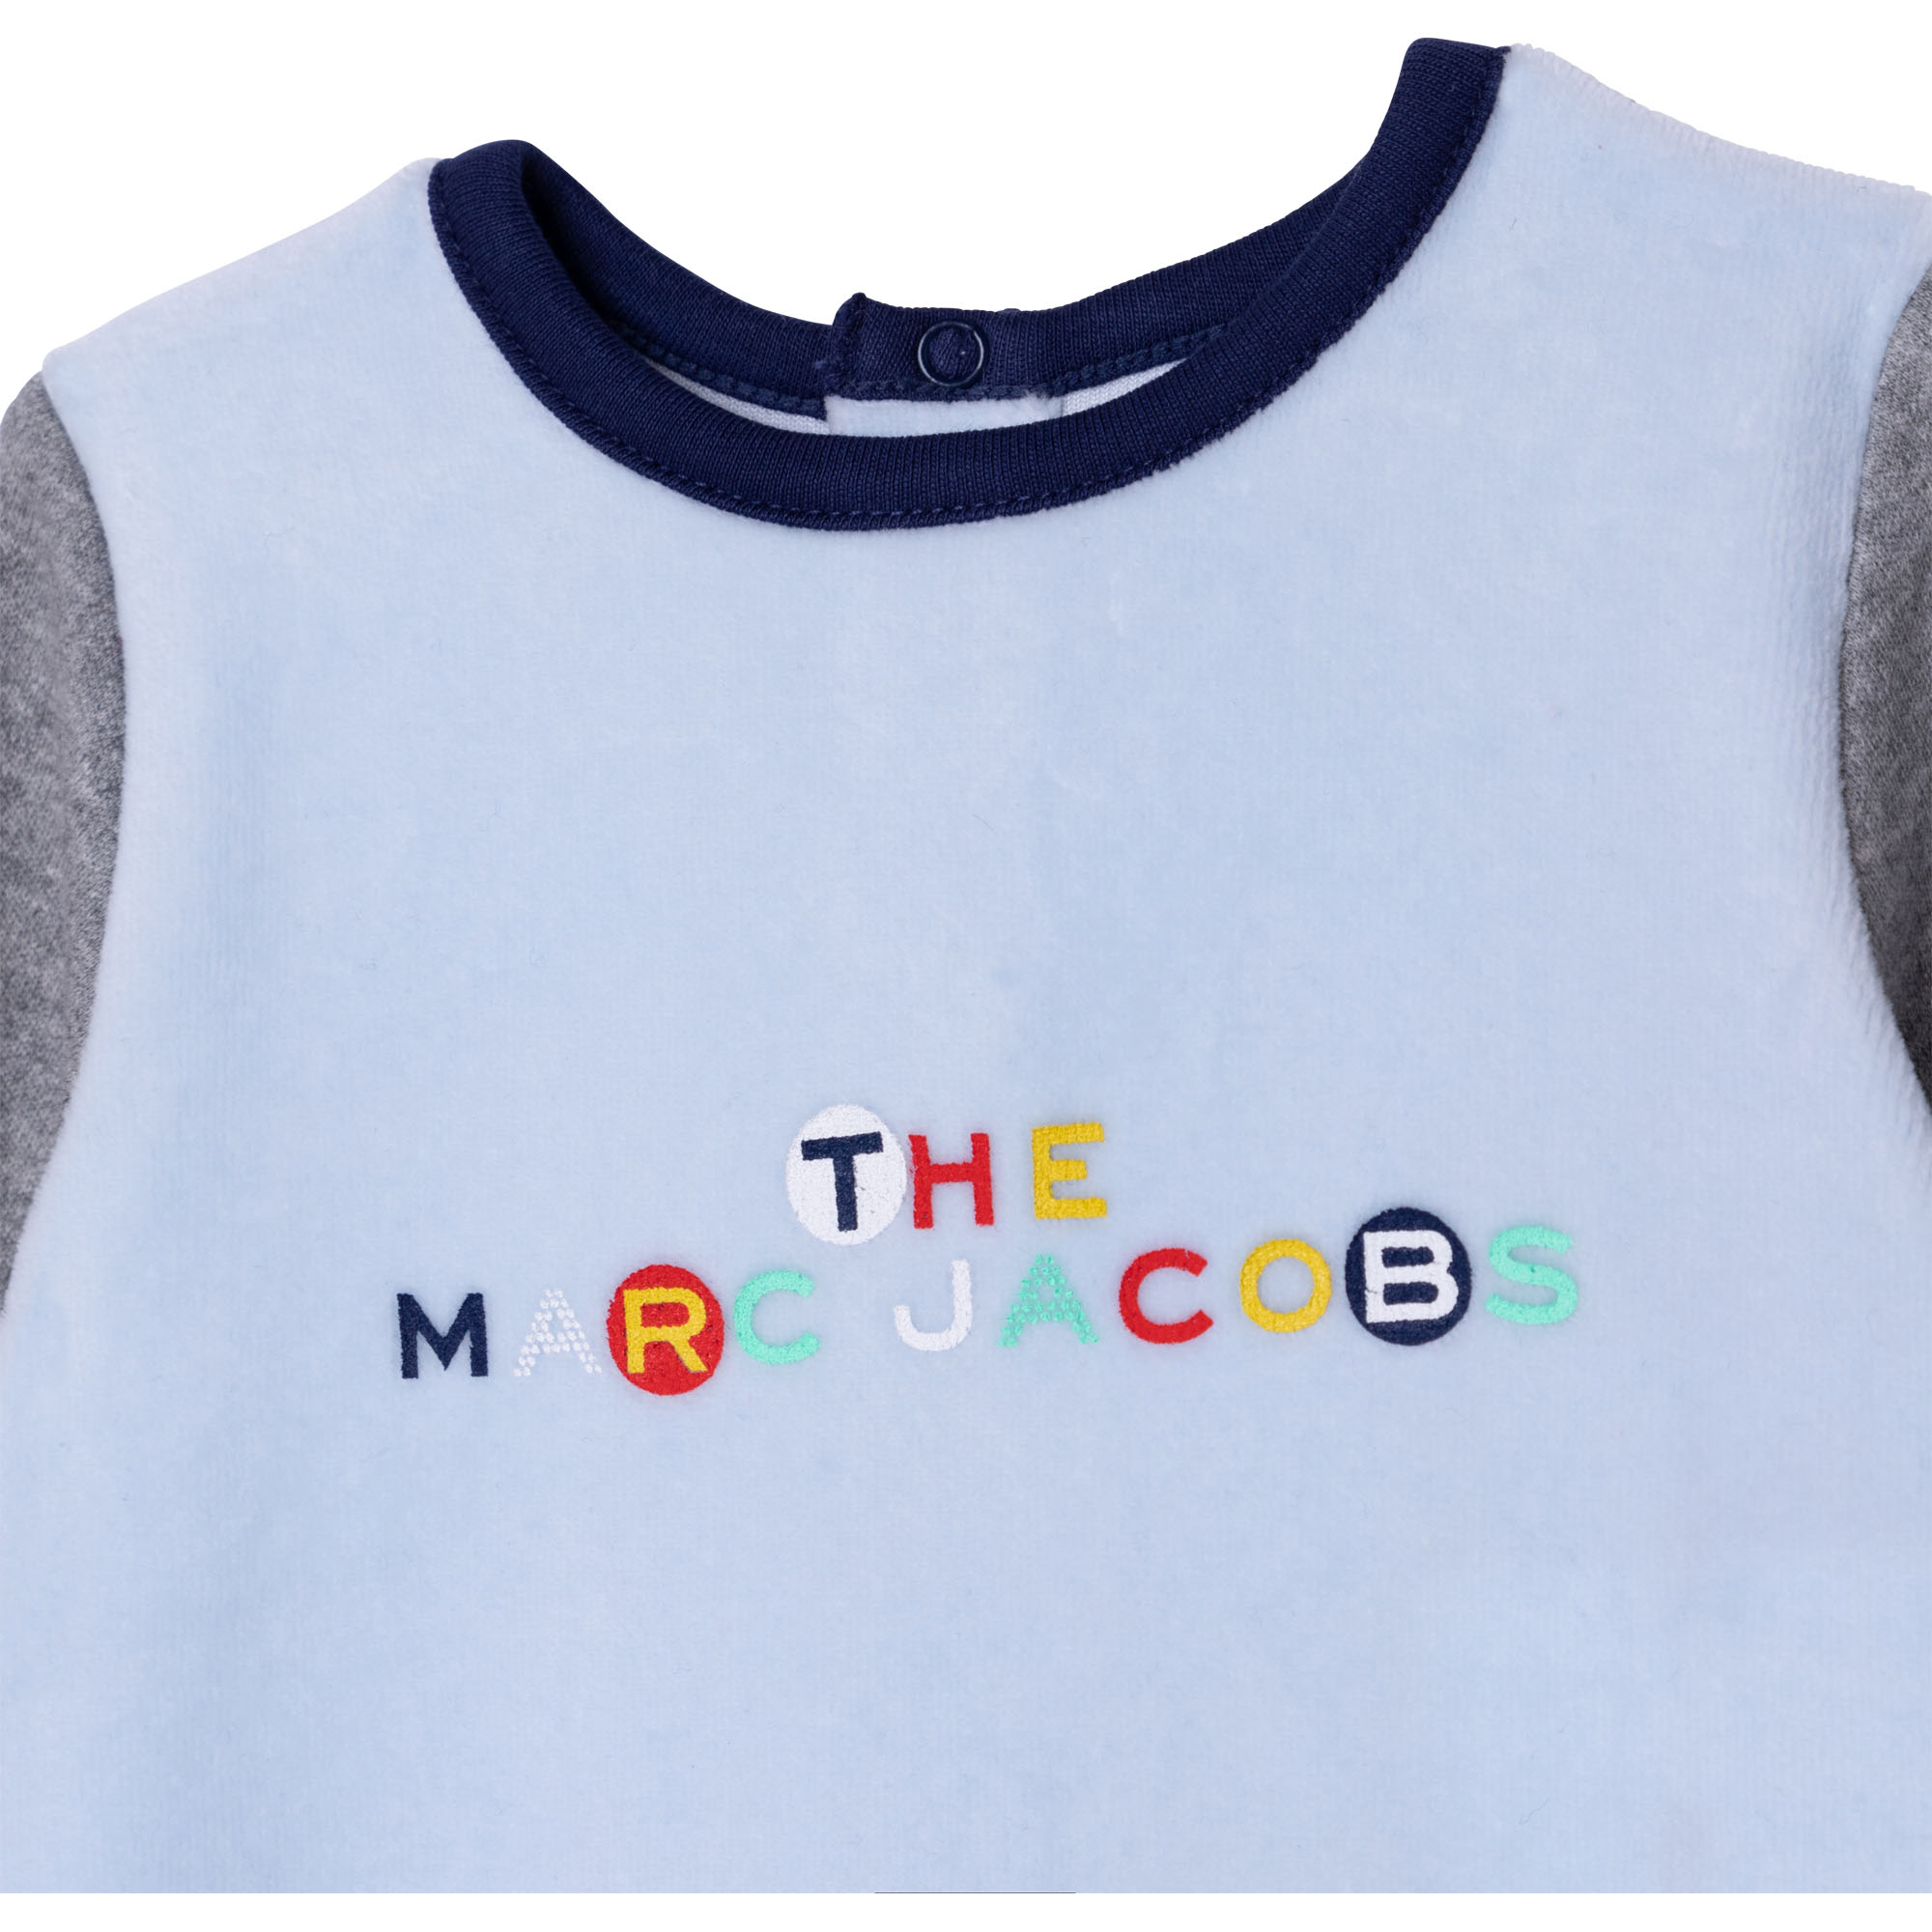 Terrycloth pajamas MARC JACOBS for UNISEX